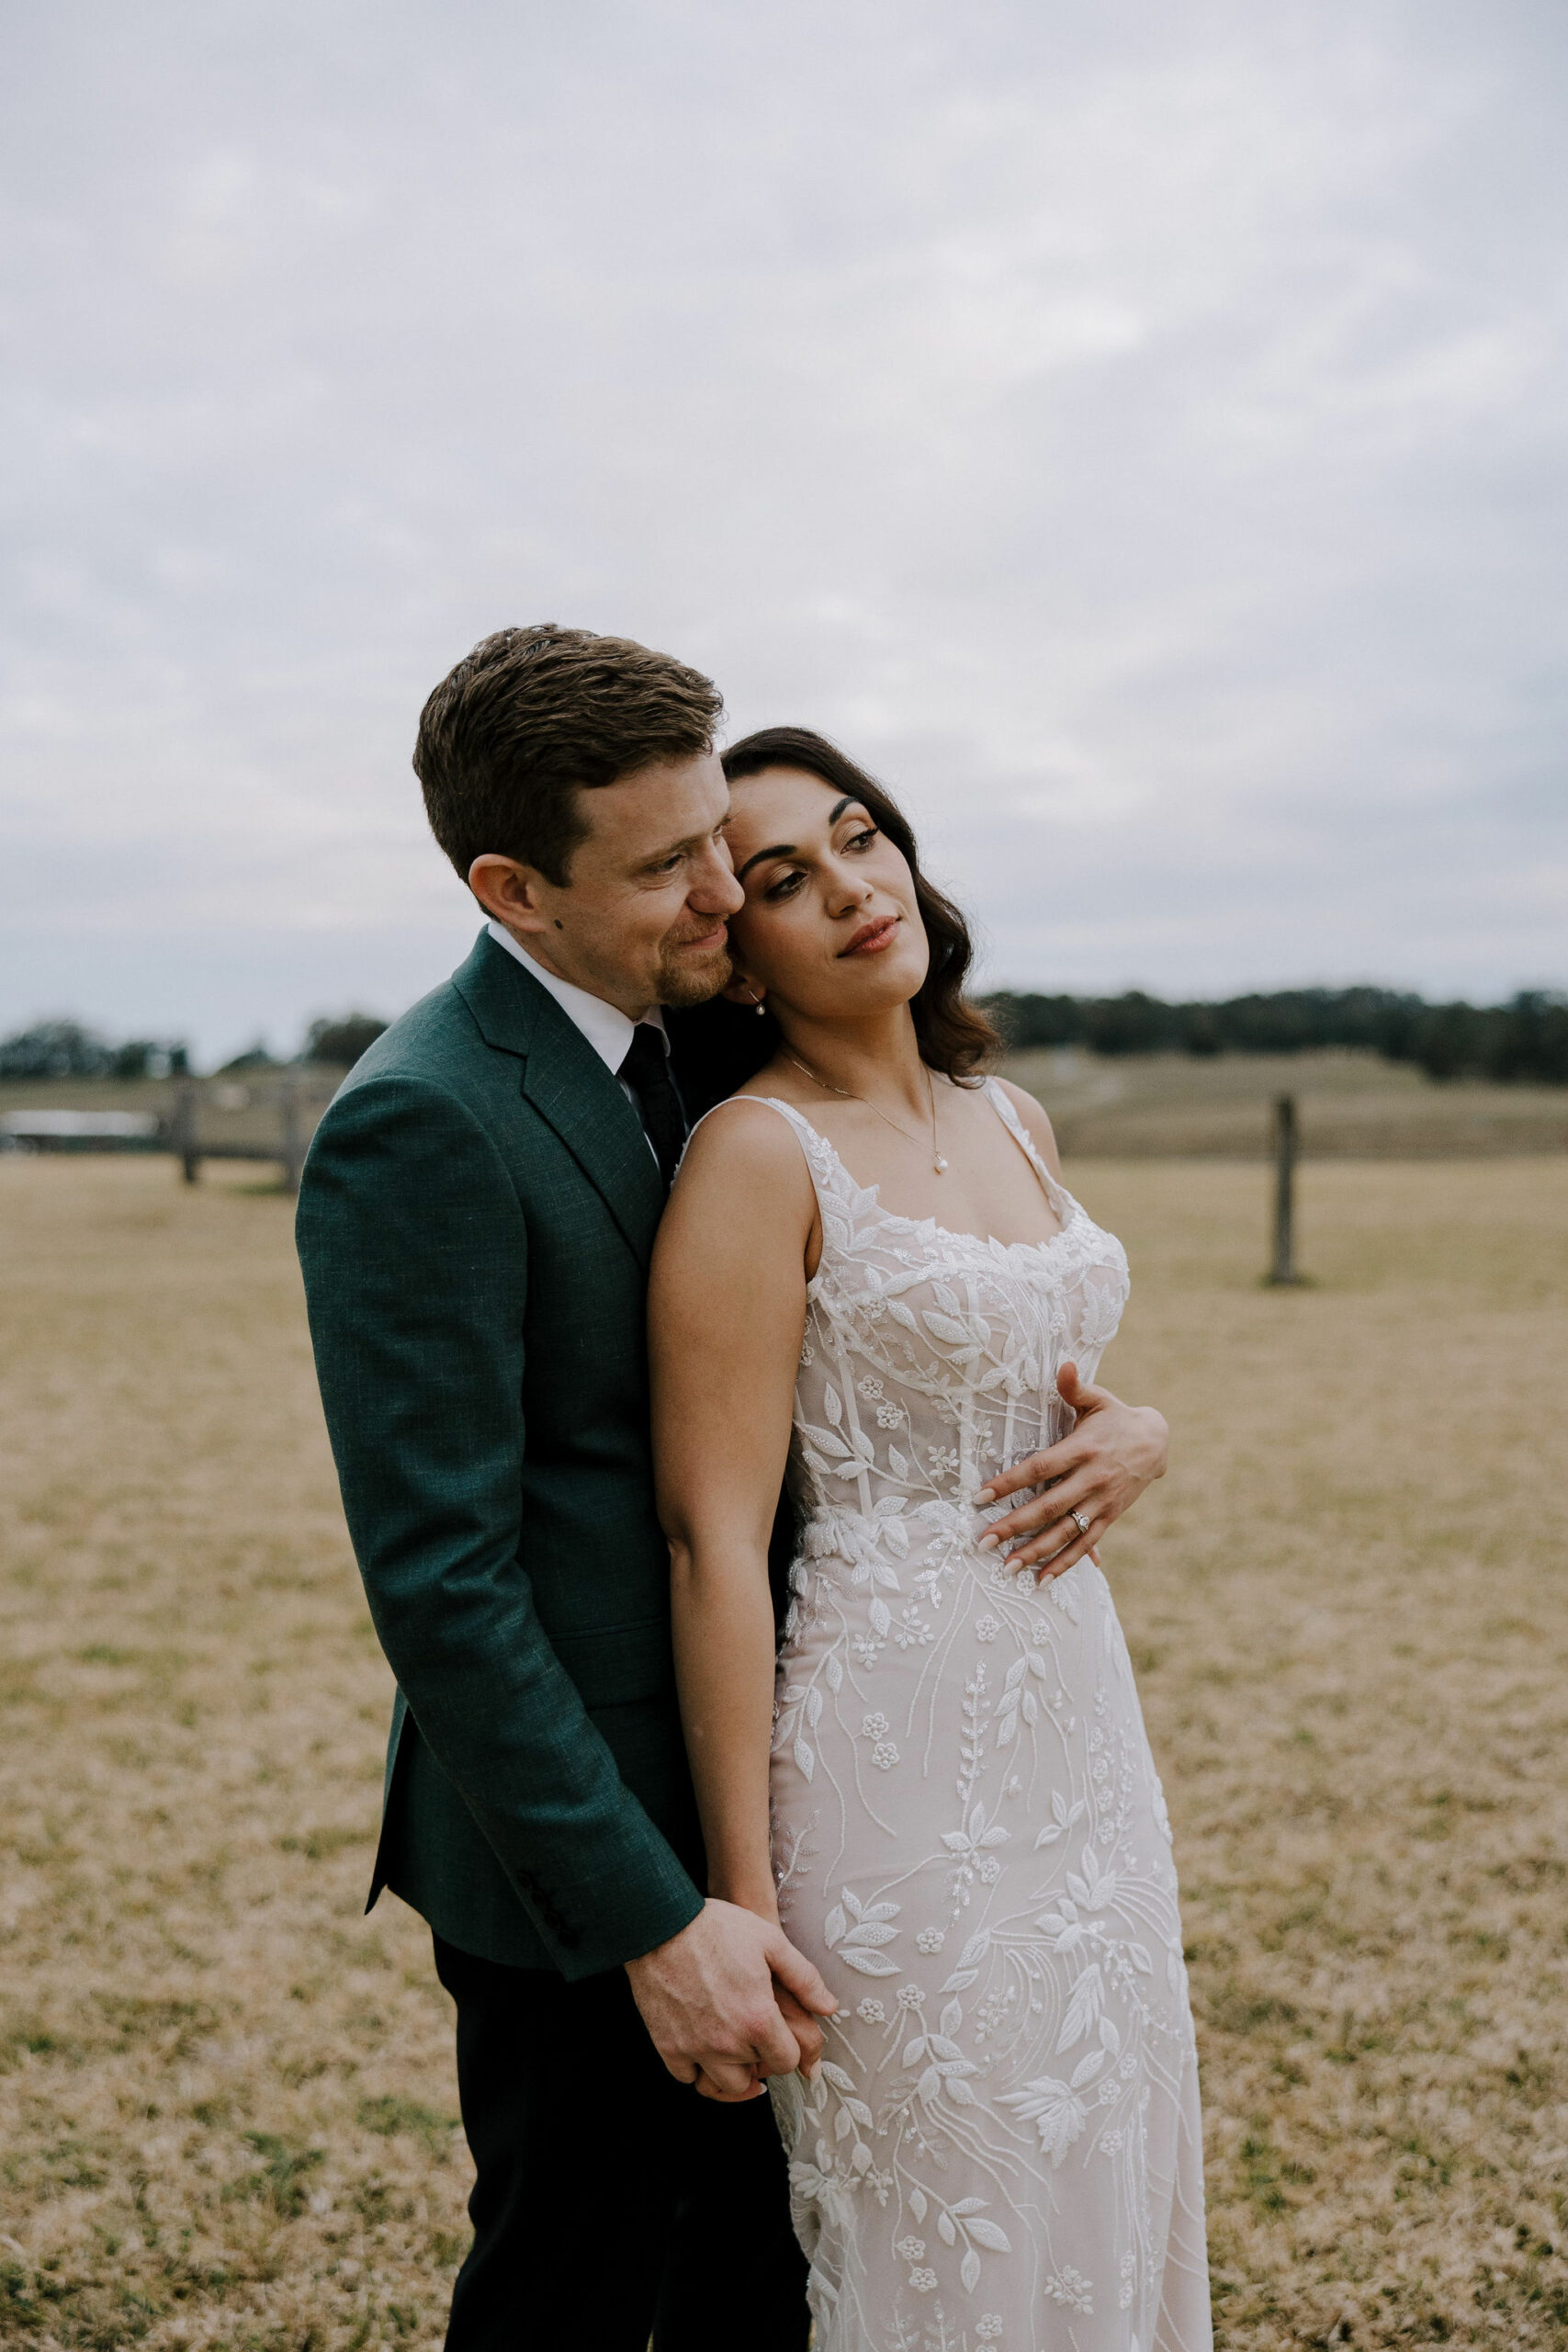 Cristina + Ned. Real Wedding. Hunter Valley Wedding Planner Magazine. Venue: Tocal Homestead. Photos by Rope and Pulley.